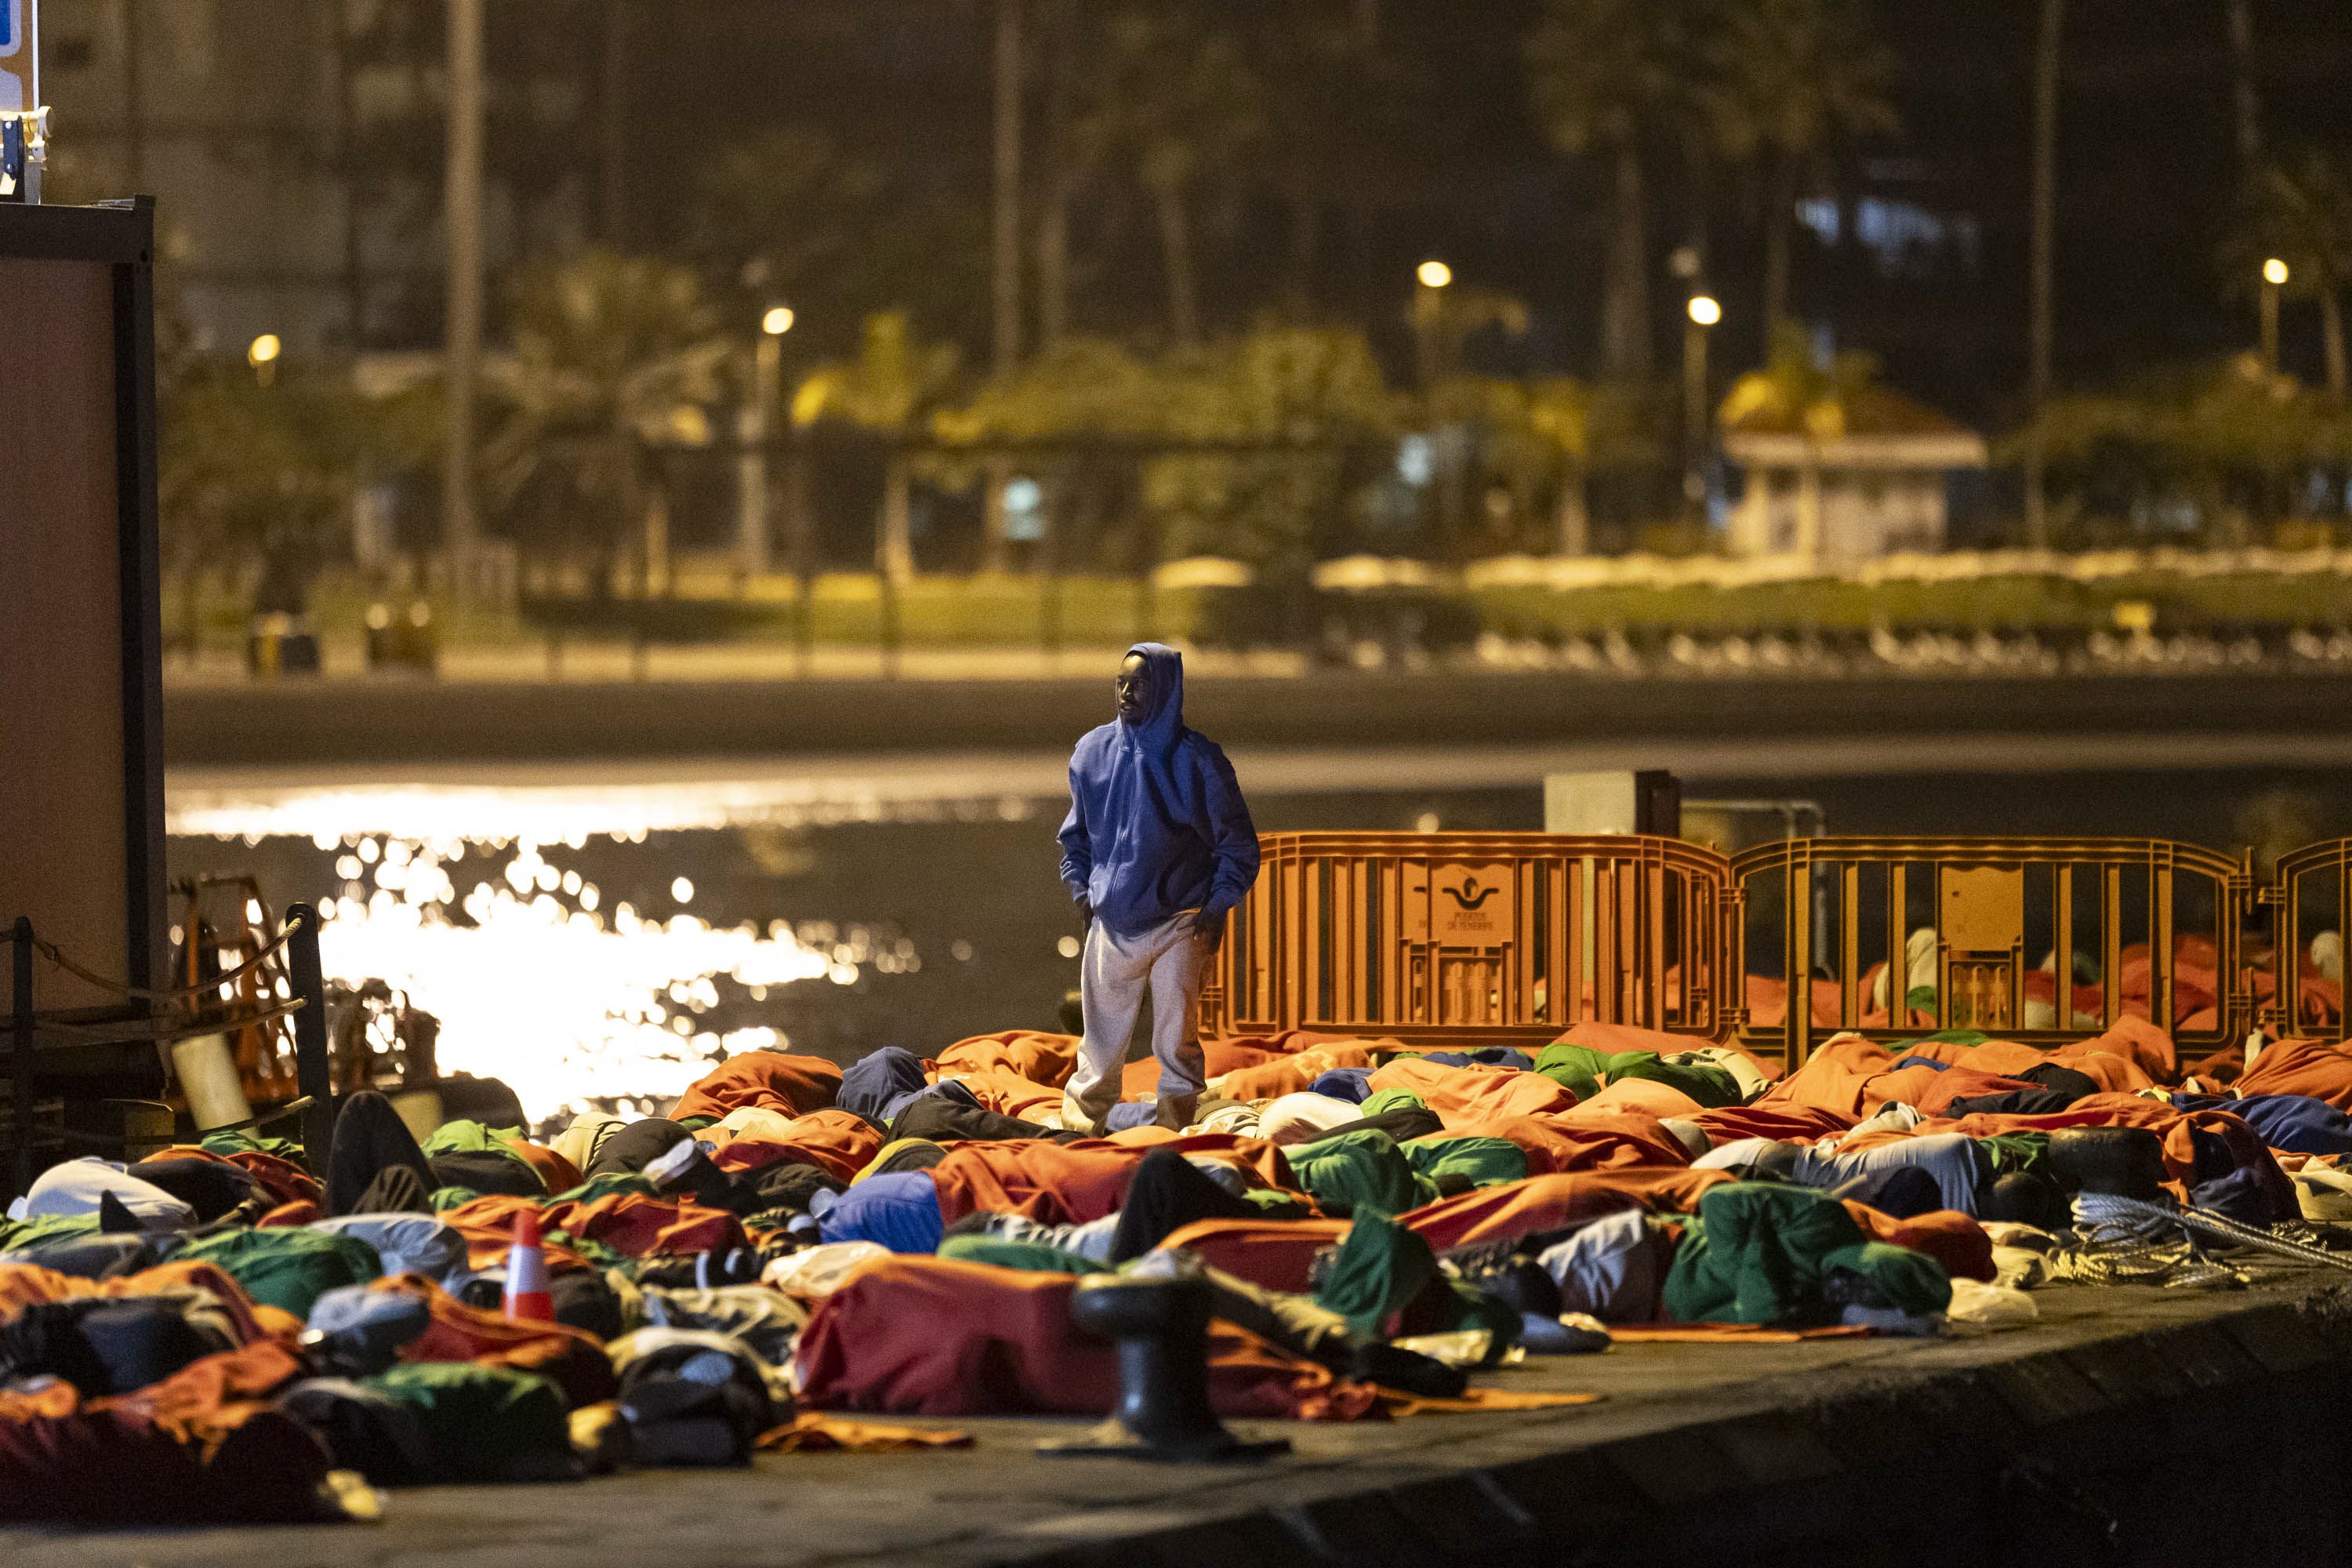 More than 200 migrants spent Friday night at the Los Cristianos dock due to the lack of space in the reception centers (Miguel Barreto / EFE)